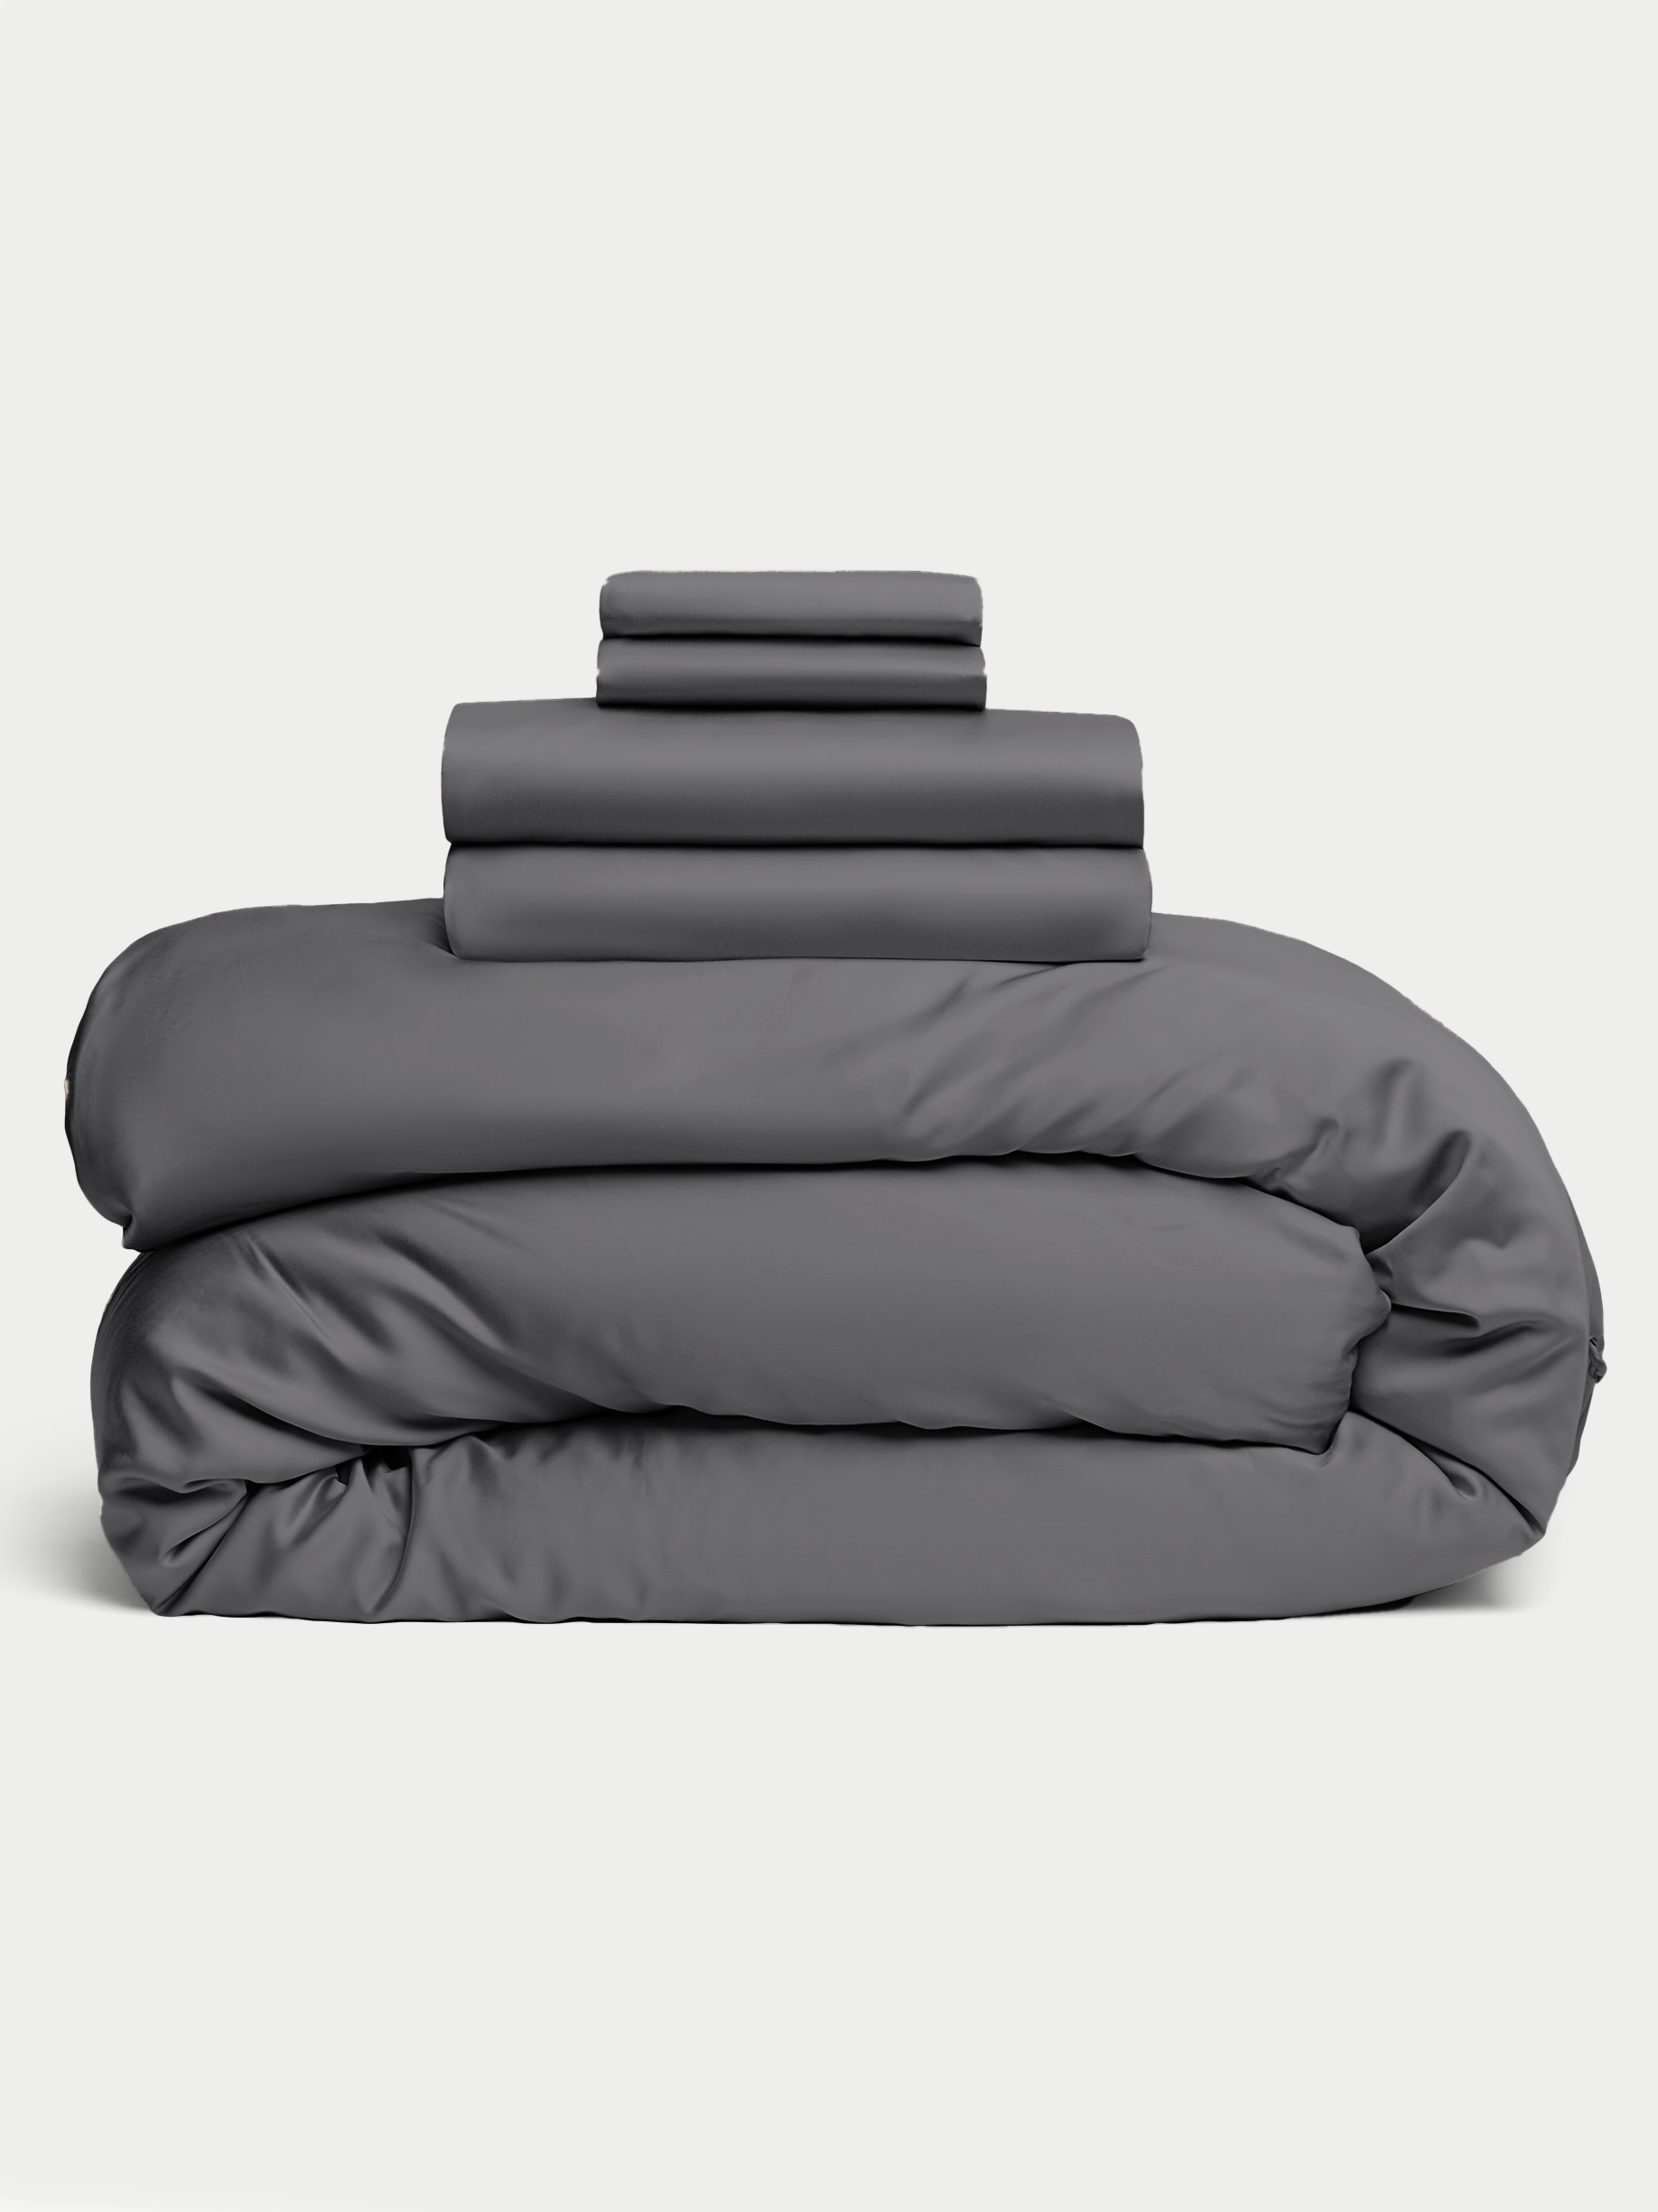 Charcoal bedding bundle stacked up with white background |Color:Charcoal